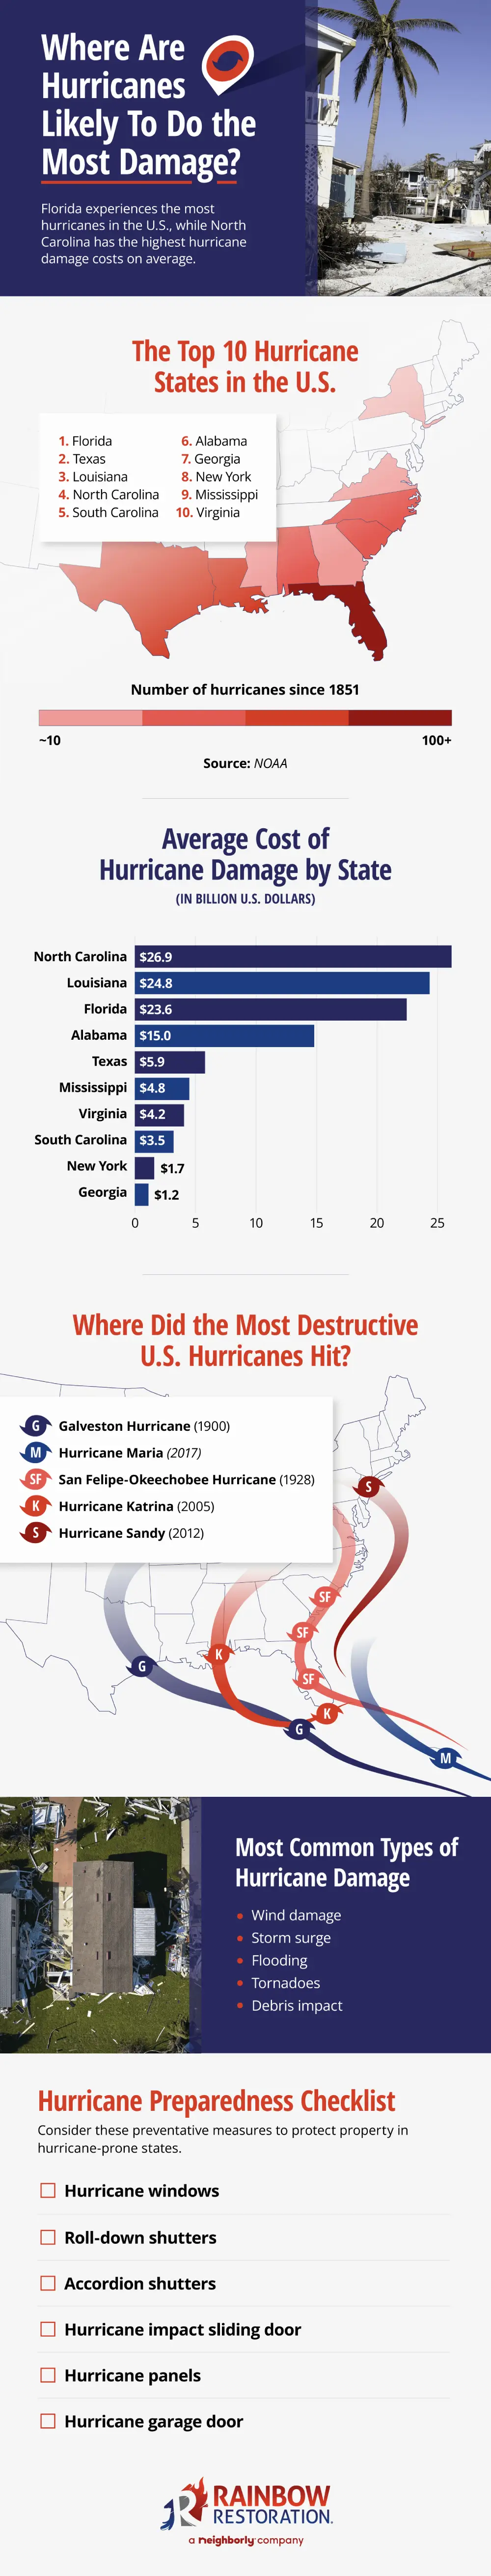 Infographic showing where hurricanes are most likely to do damage in the U.S. and expected costs.